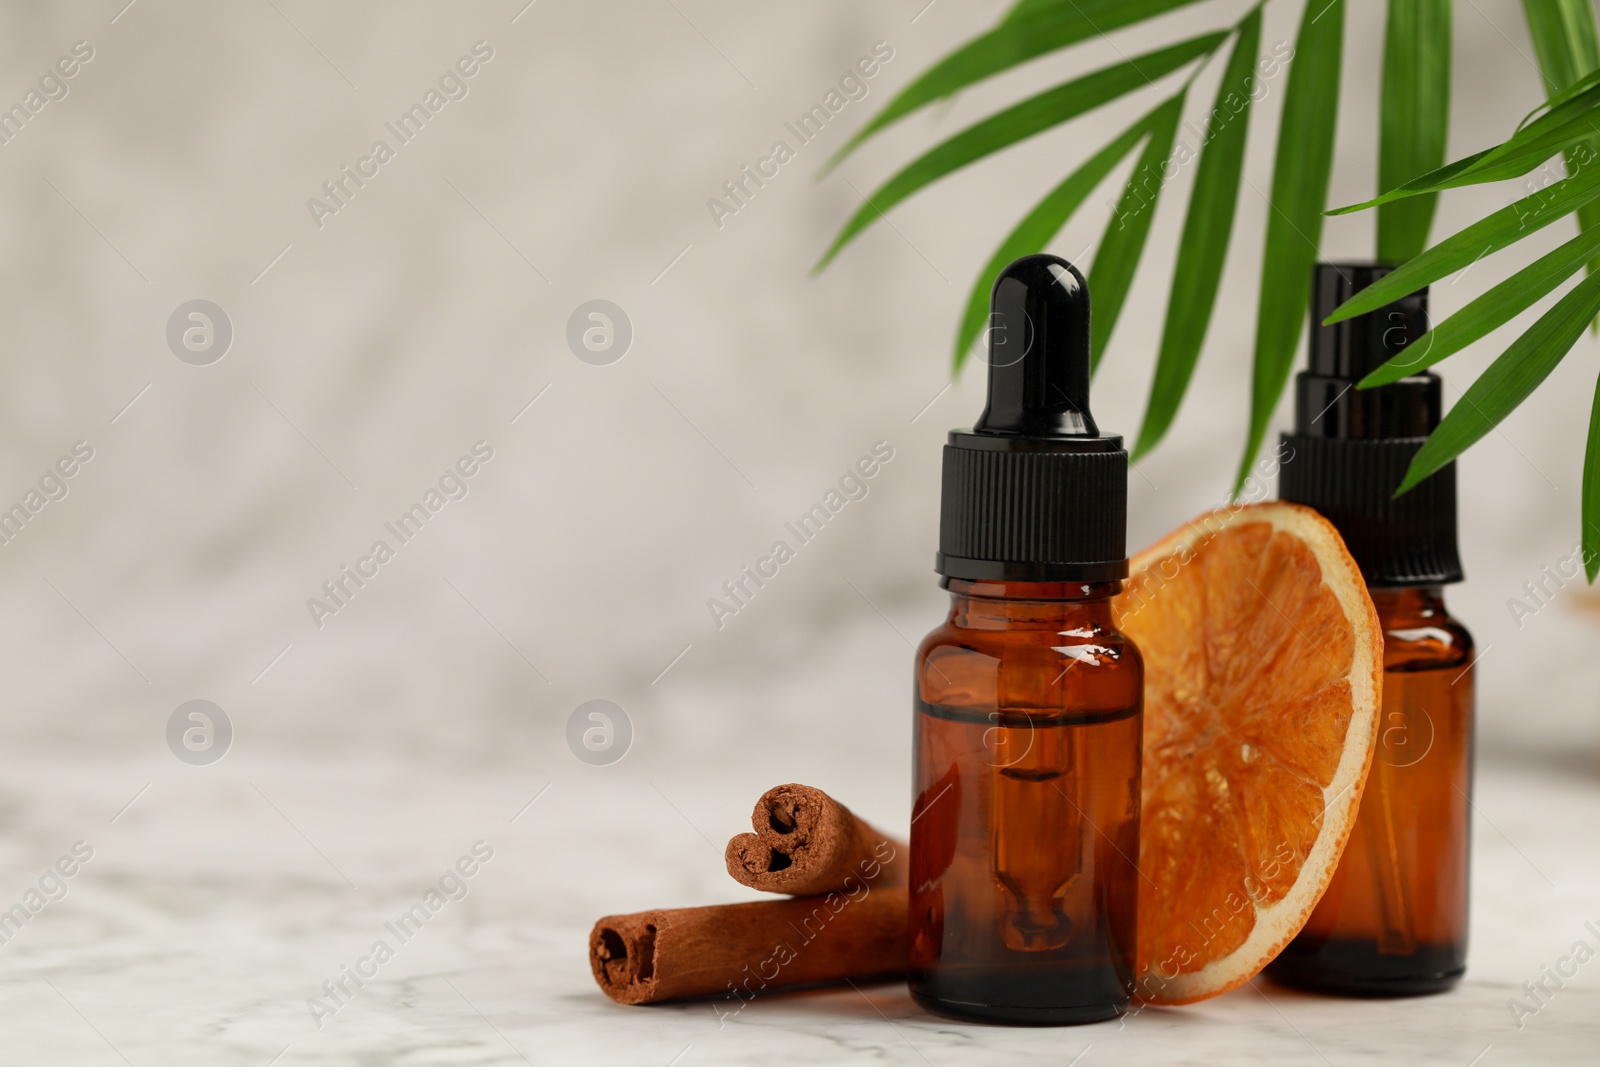 Photo of Bottles of organic cosmetic products, cinnamon sticks, dried orange slice and green leaves on light marbled background, space for text